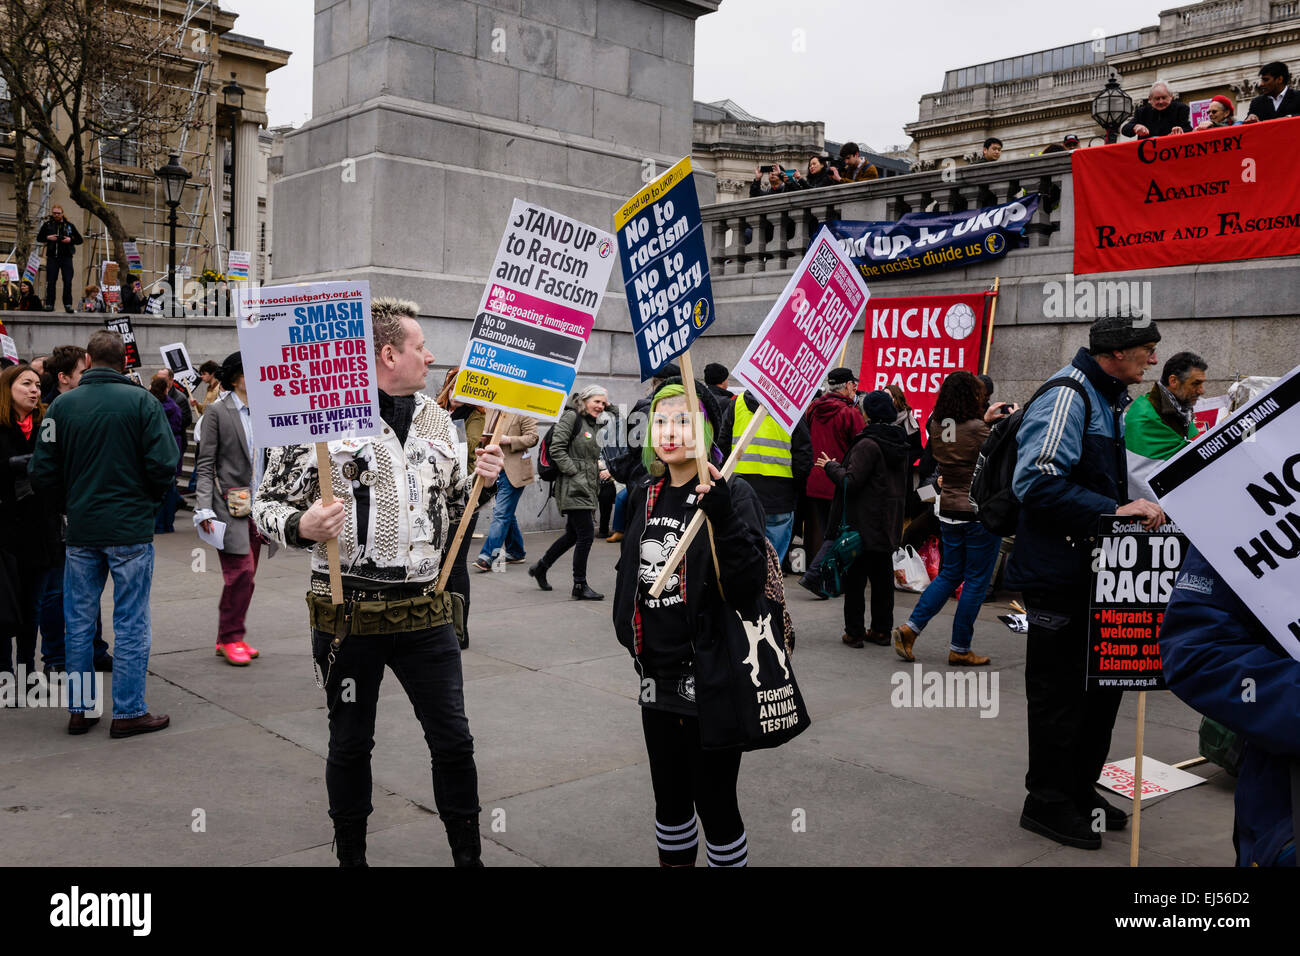 London, UK. 21st Mar, 2015. People marching through the streets of London in a march arranged by Unite Against Fascism (UAF) to 'Stand Up Against Racism' on UN Anti-Racism Day on 21st of March 2015. Credit:  Tom Arne Hanslien/Alamy Live News Stock Photo